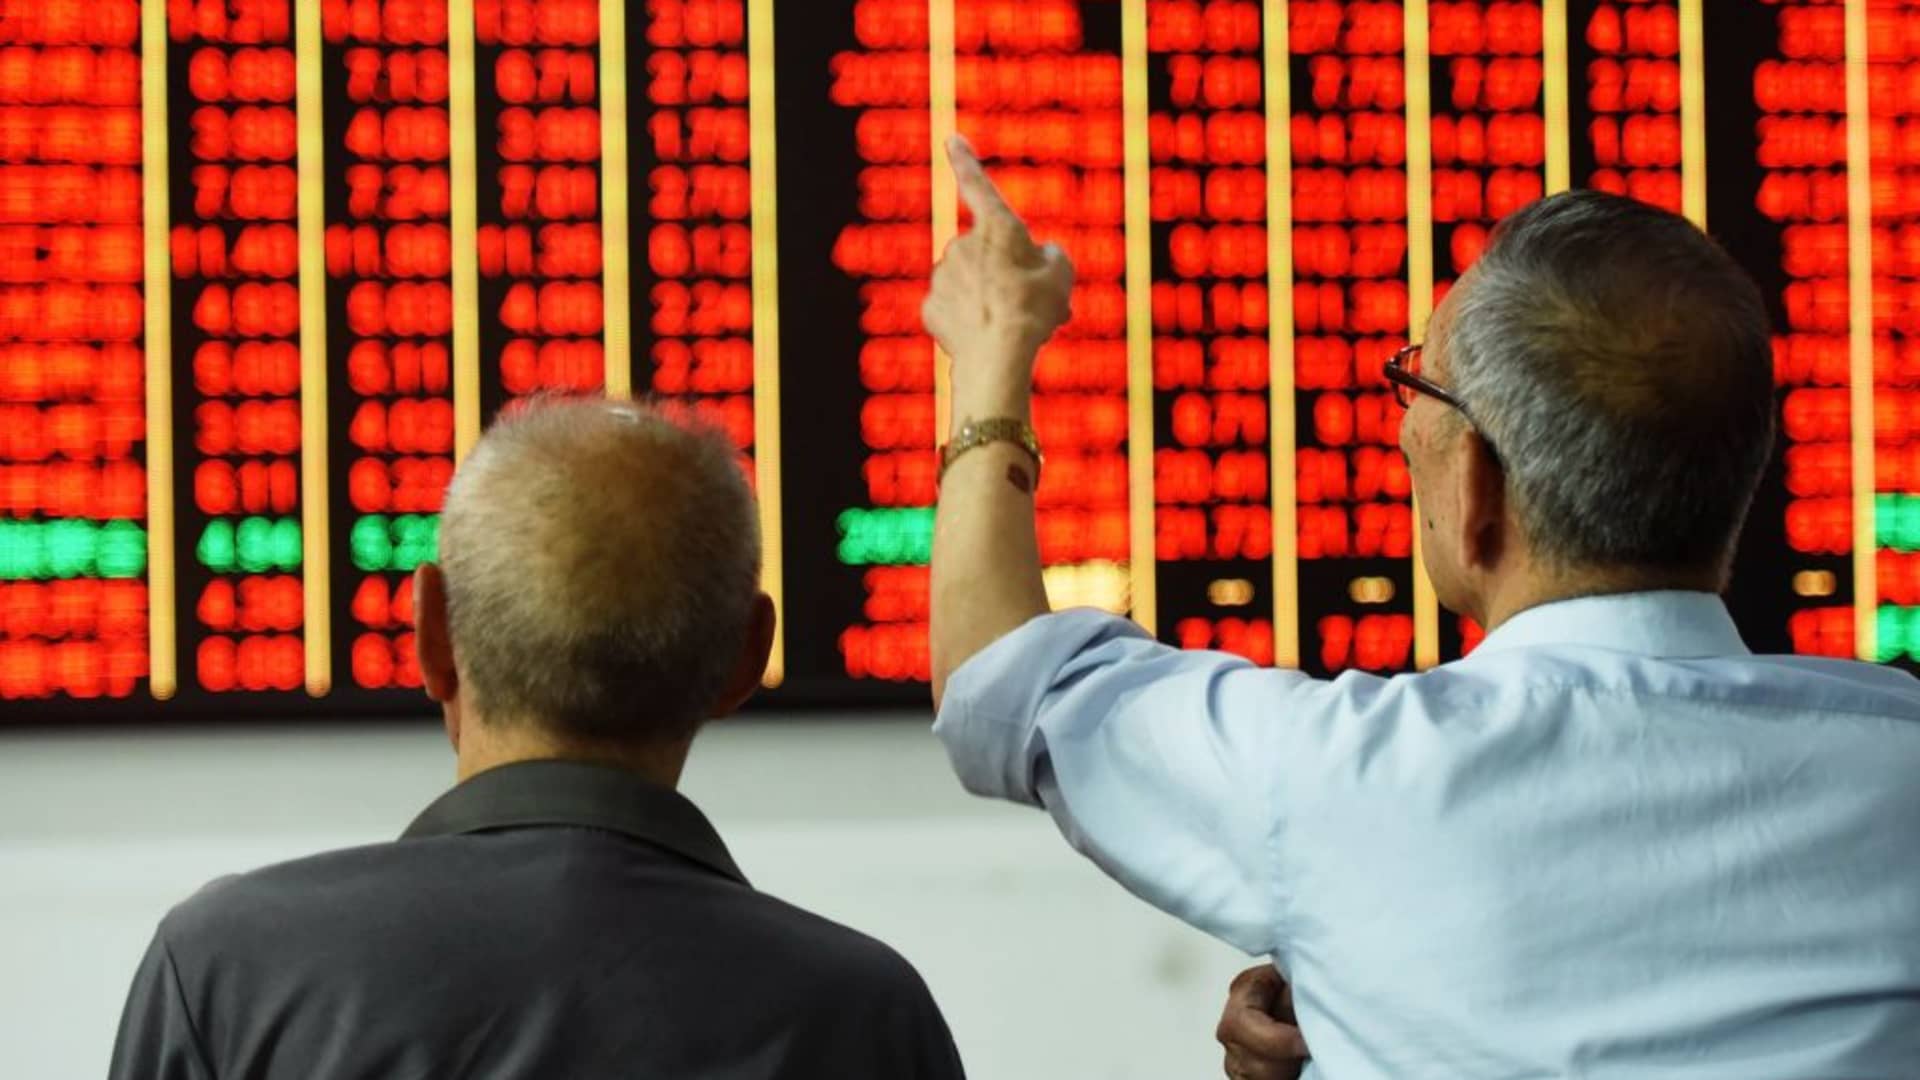 China is an ‘attractive market’ with ‘inexpensive’ stocks after big drops, fund manager says giving 3 picks